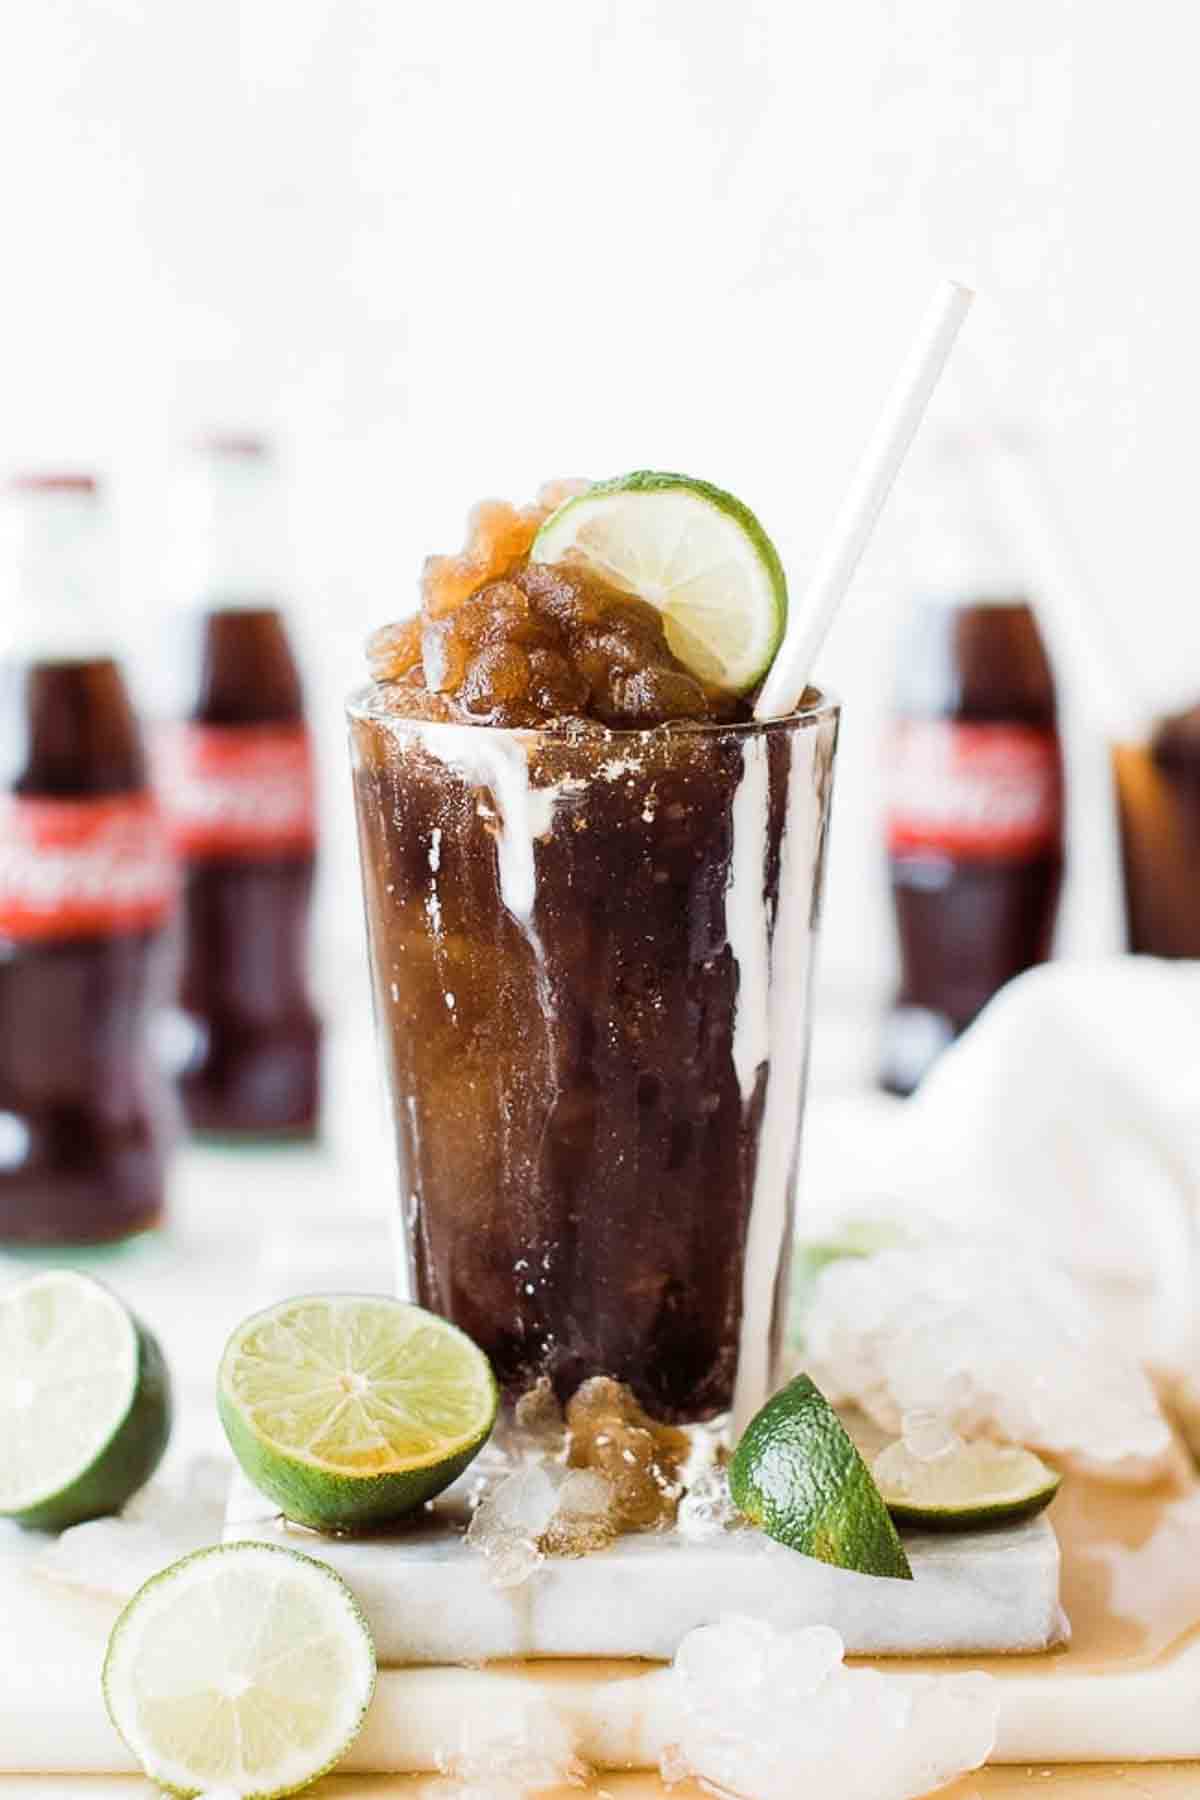 A frozen coke slushie in a glass garnished with a lime and a straw.